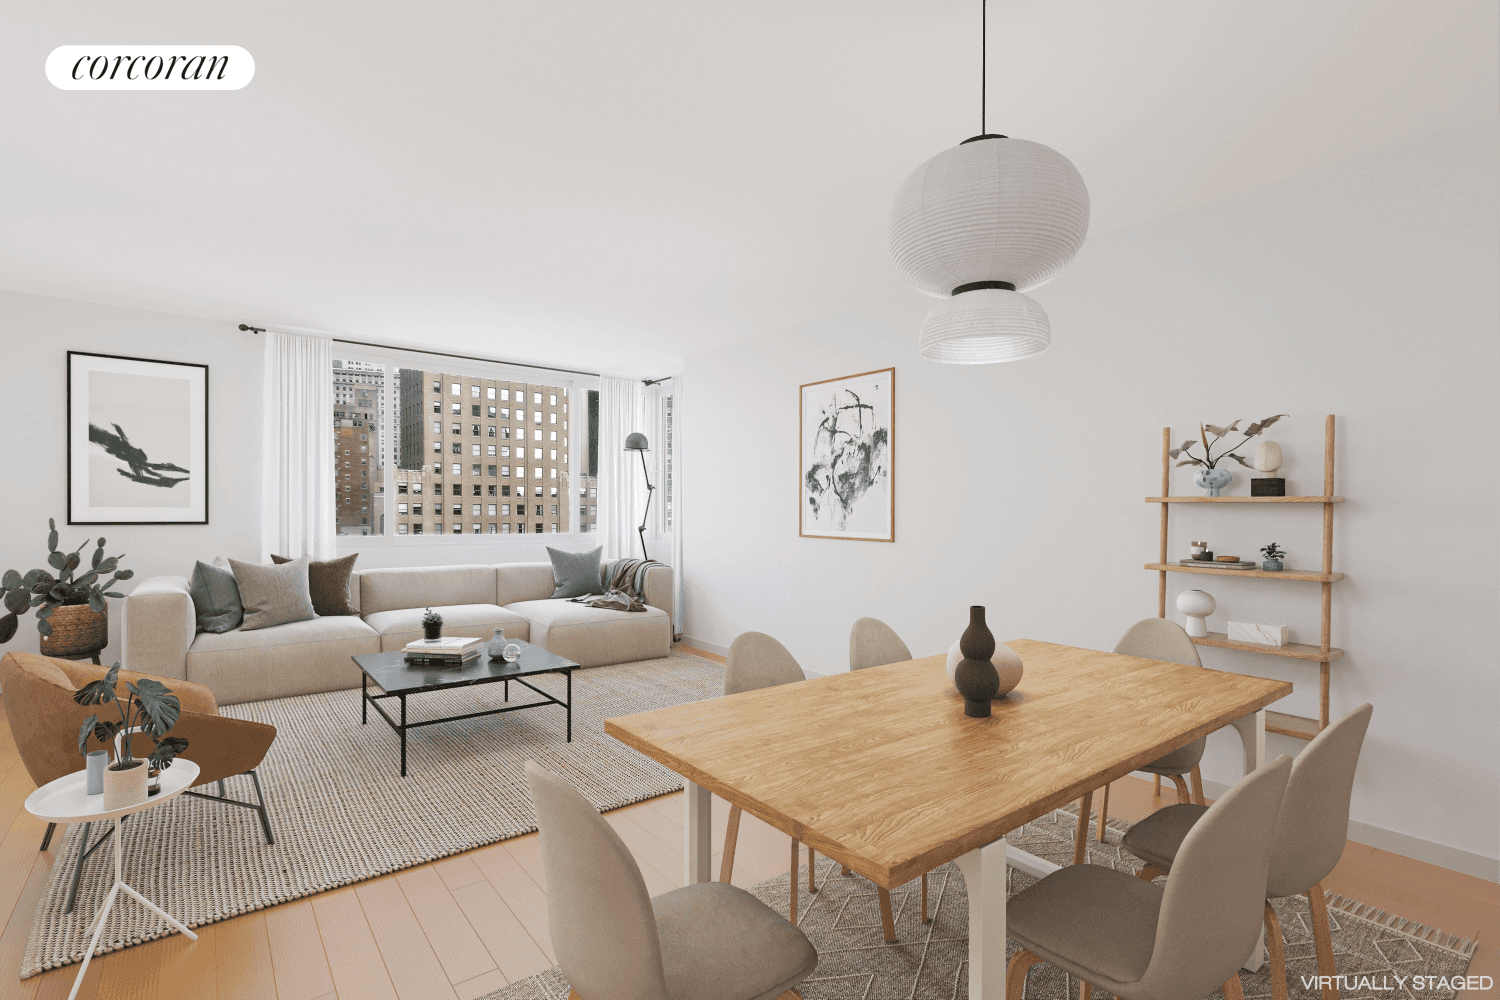 Champagne and Chocolate Served Virtually Staged This home must be bought Welcome to Apartment 8D, a large bright 2 bedroom 2 bath home in the Boutique building, Hudson View East.